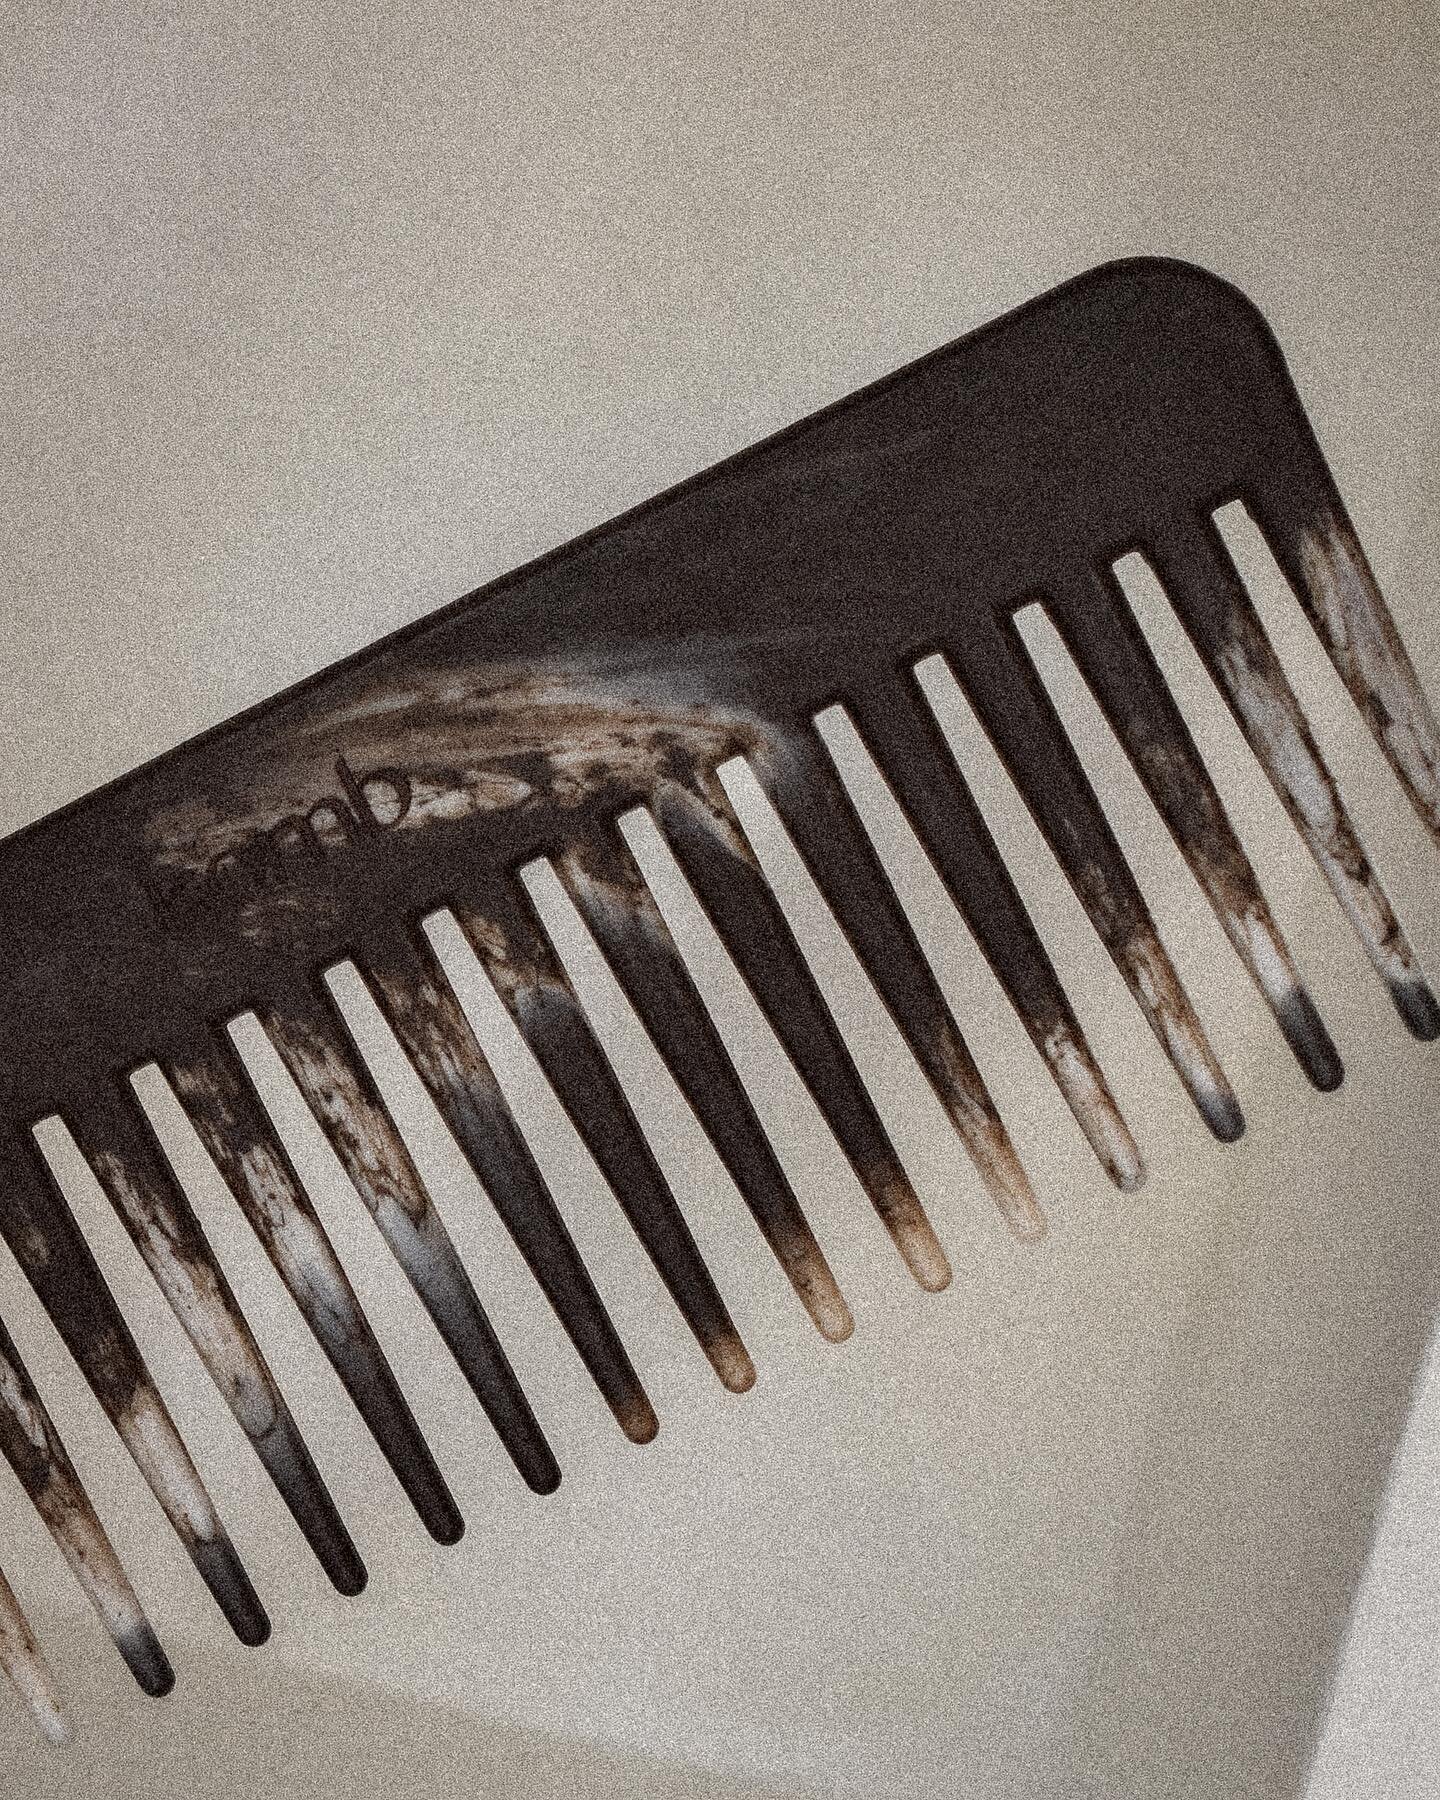 Obsessed with our comb from @komb.beauty! 😍

So grateful to have collaborated with Komb to create their website and for our beautiful gift!

They have created such an incredible product and we are so lucky to have been part of their small biz journe